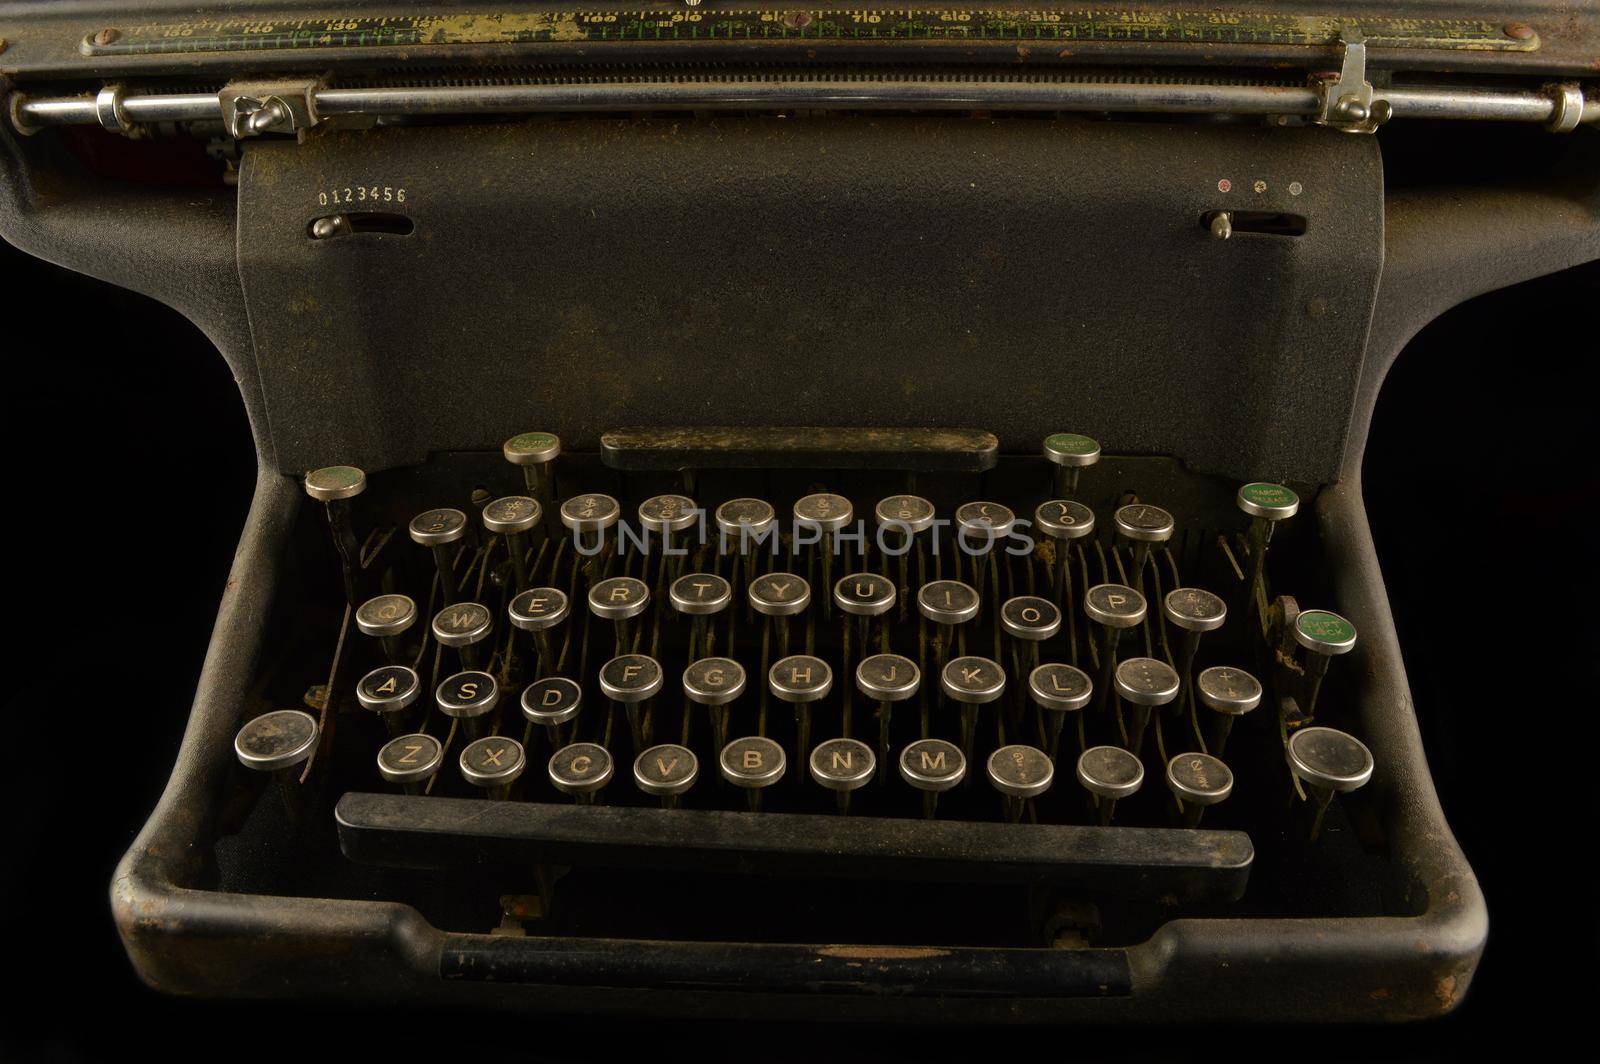 A closeup view of a vintage typewriter over a black background.